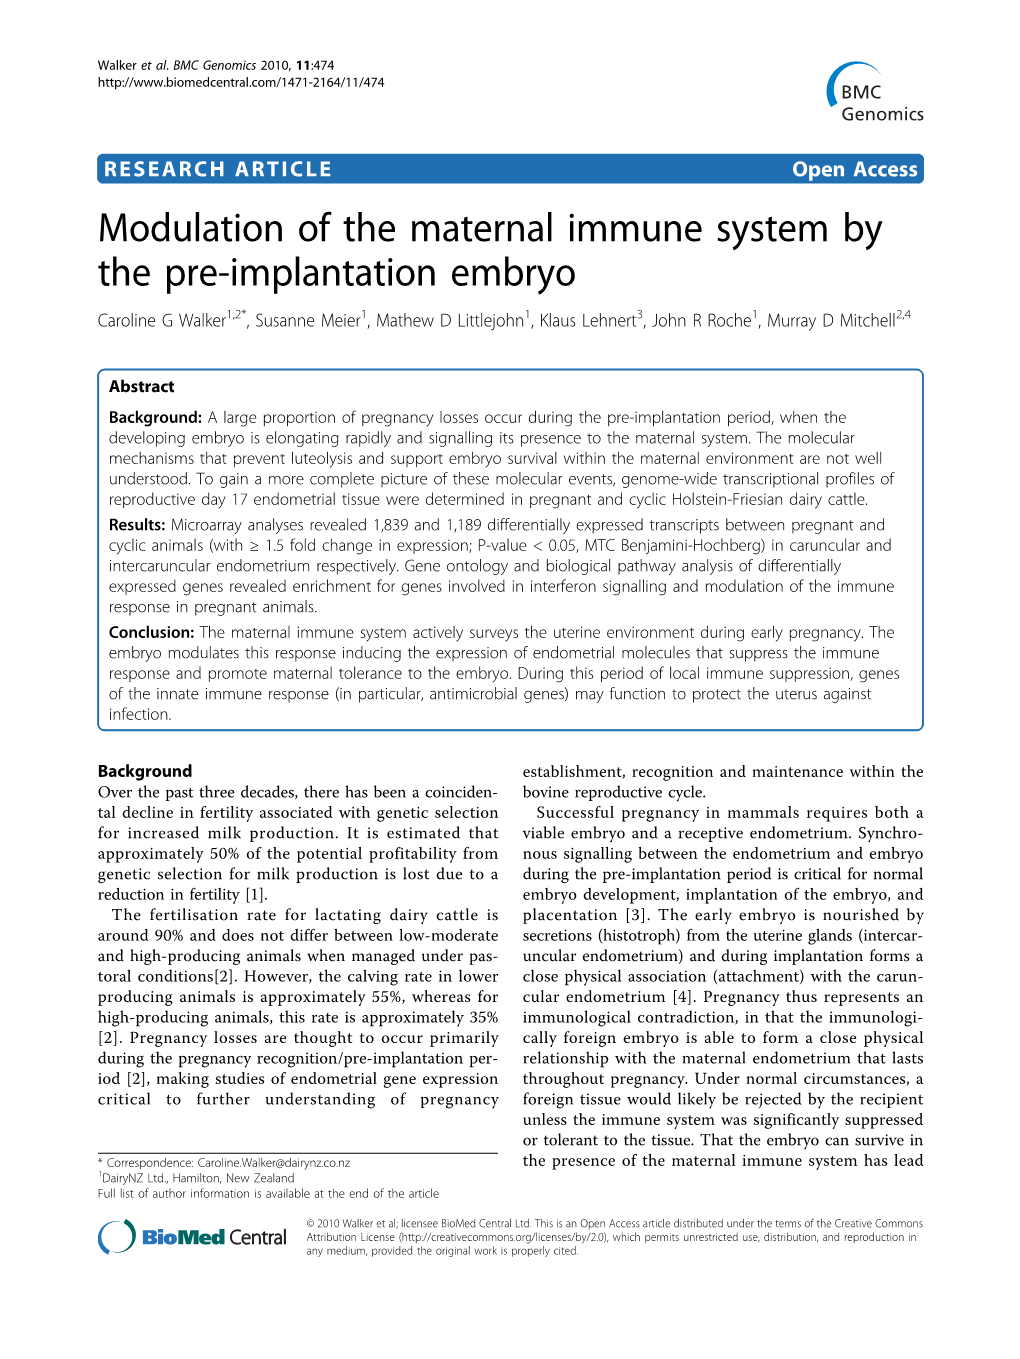 Modulation of the Maternal Immune System by the Pre-Implantation